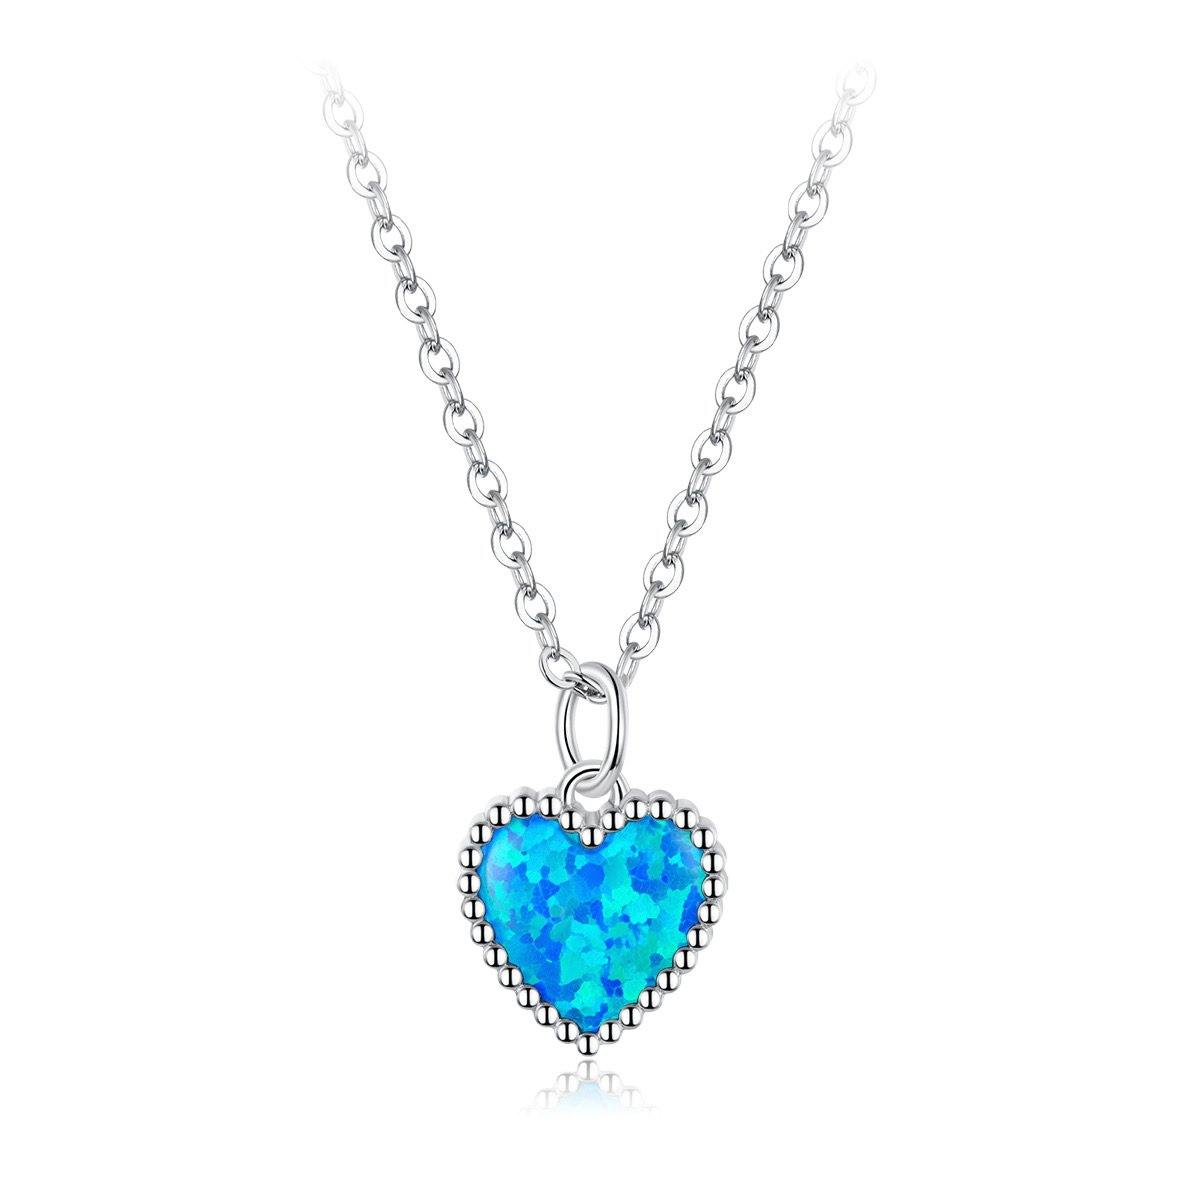 Deep Blue Heart 925 Sterling Silver Necklace - Aisllin Jewelry